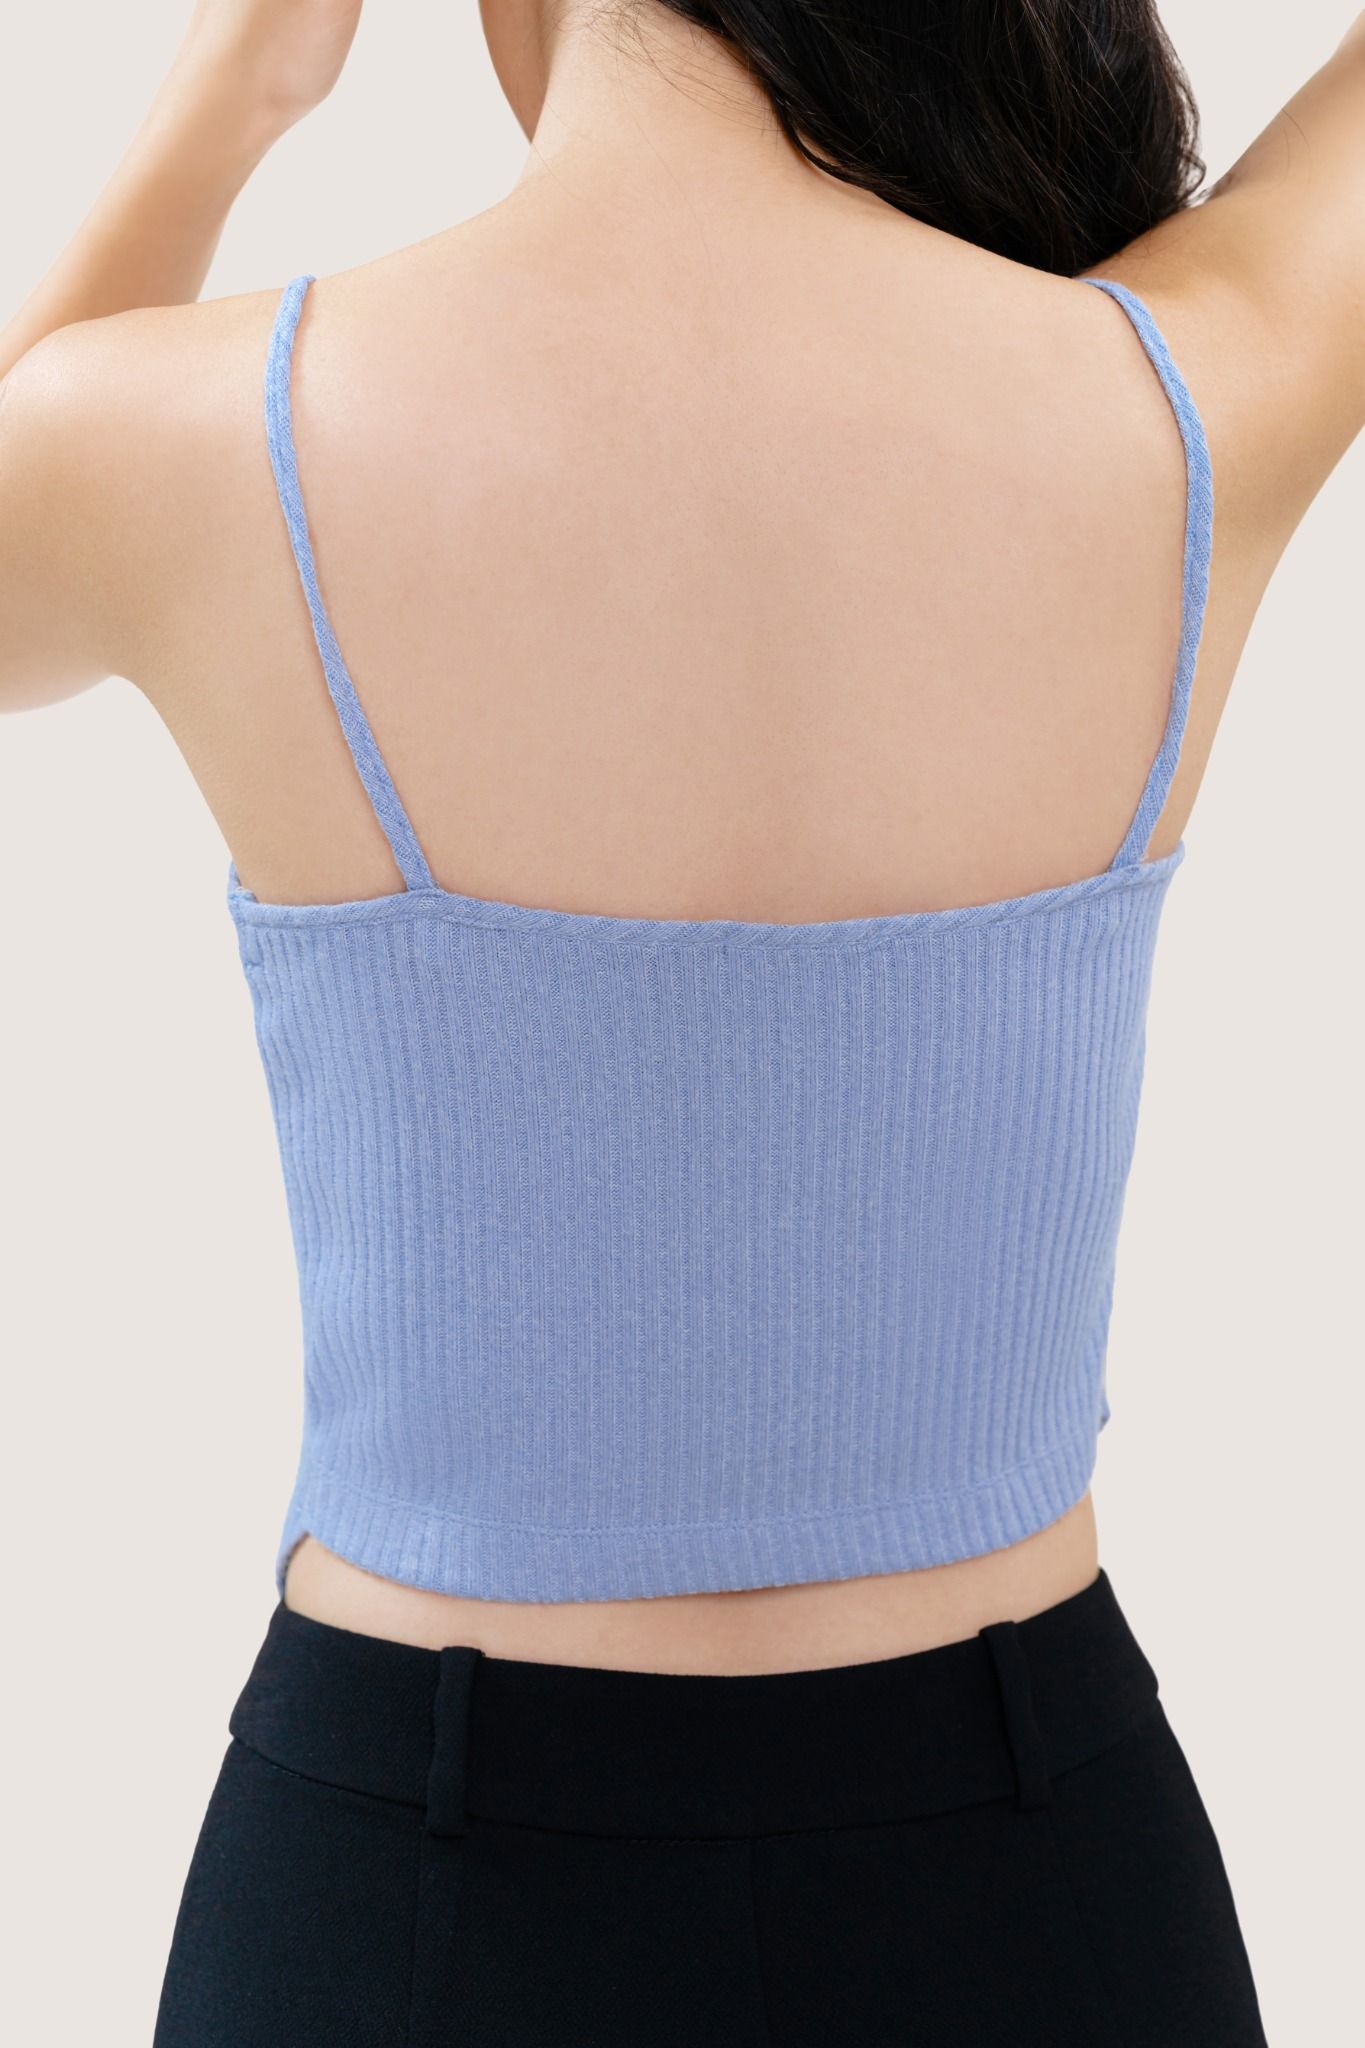  Blue Pointy Cami Top 